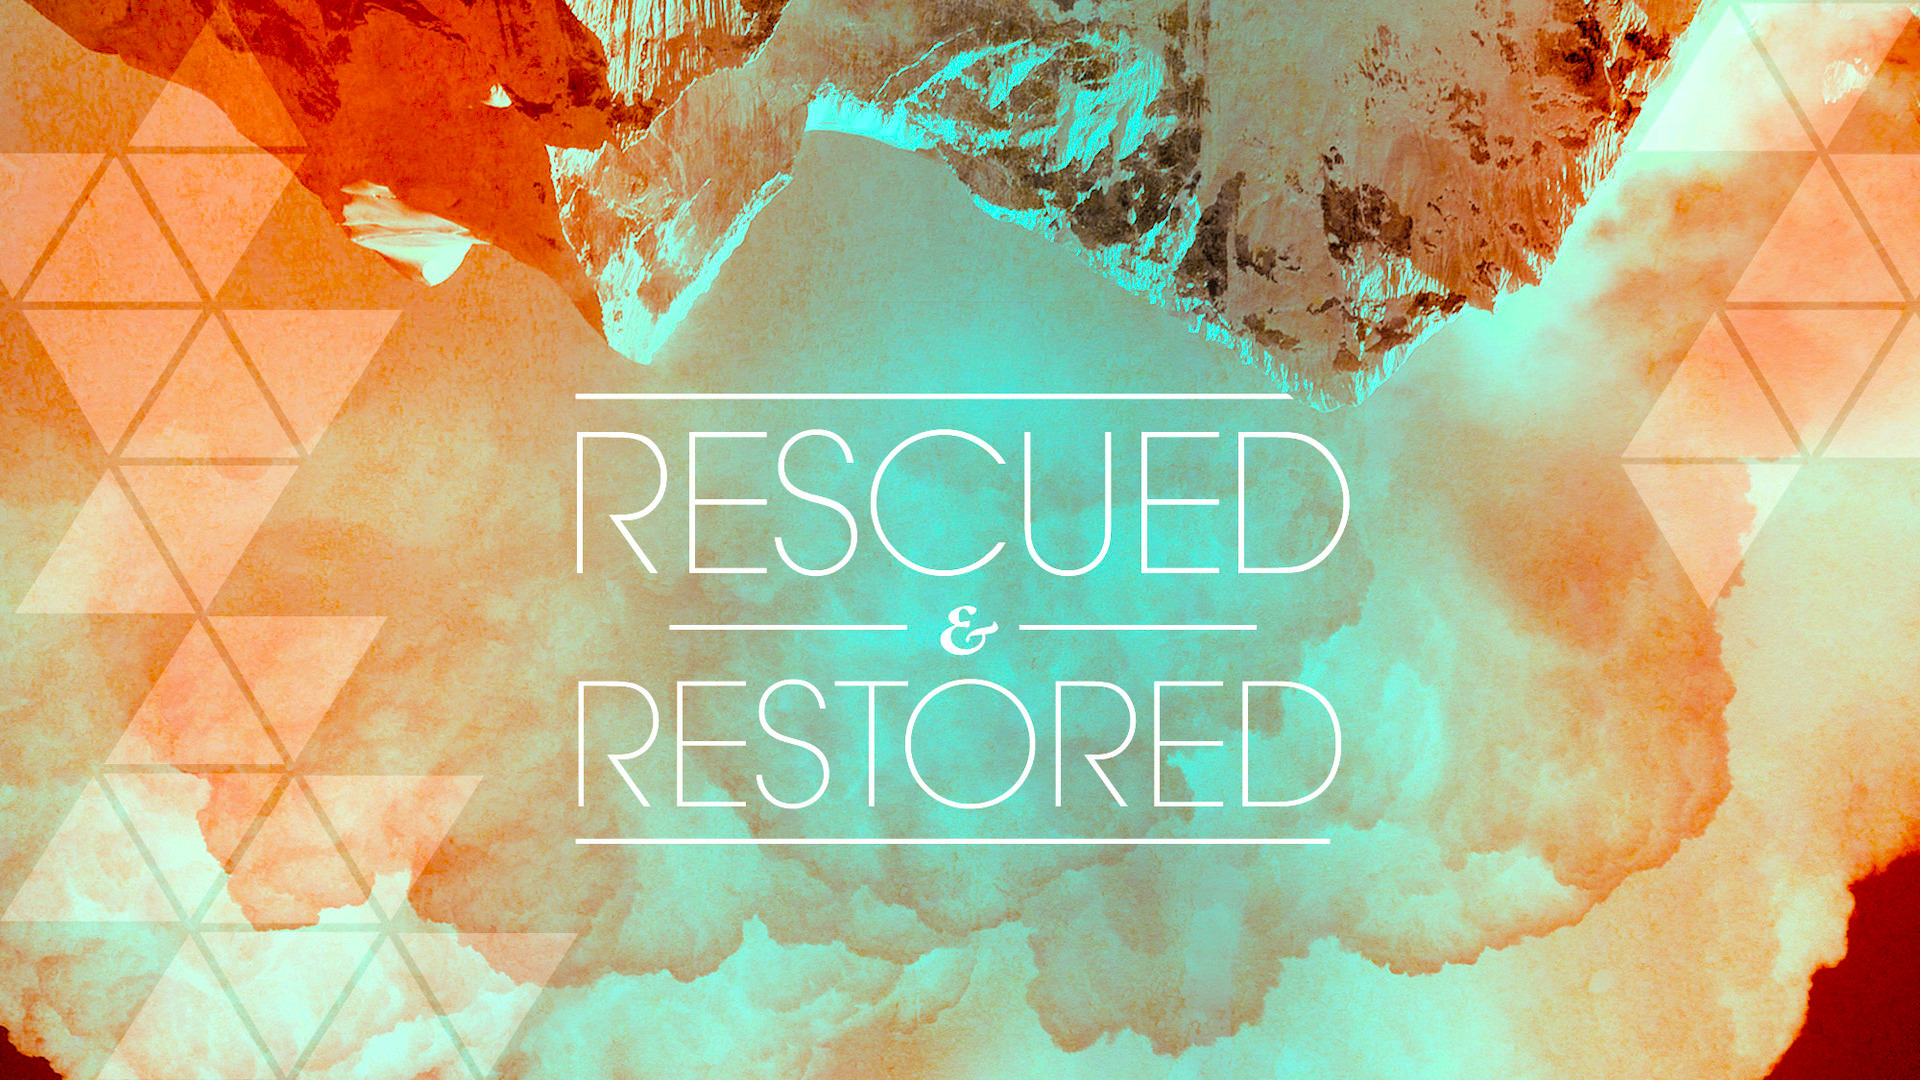 07-17-16 | Rescued & Restored | Why the New Life? | Mark Anderson